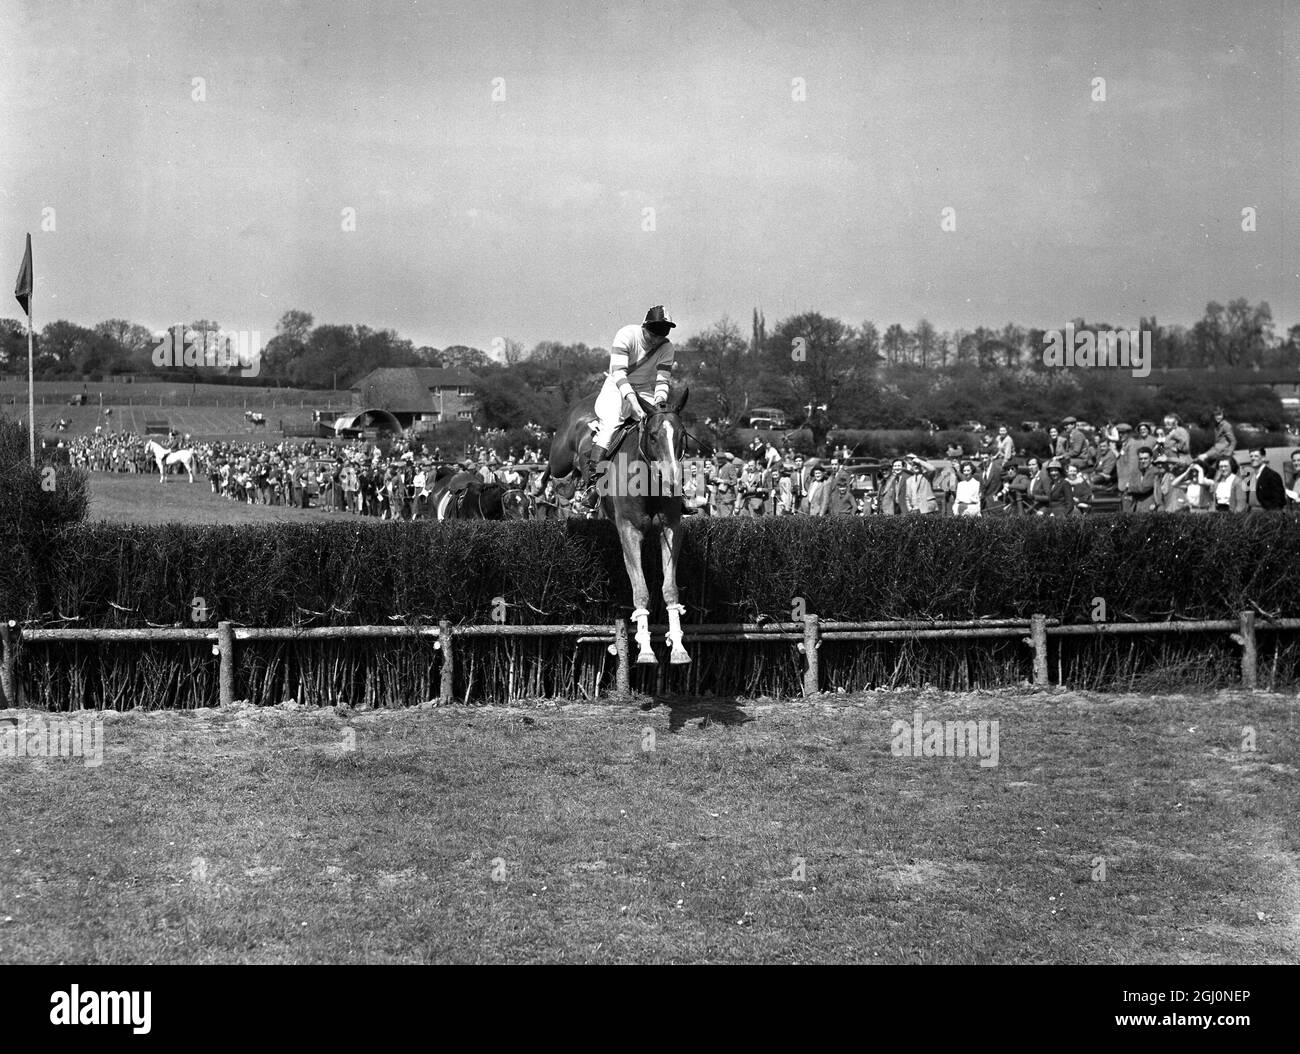 9 May 1954 Gay Kindersley takes the last on Huckster to win the Masters' Cup event at the Old Surrey and Burstow Hunt point-to-point races at Spitals Cross, Edenbridge, Kent, England. TopFoto.co.uk Stock Photo